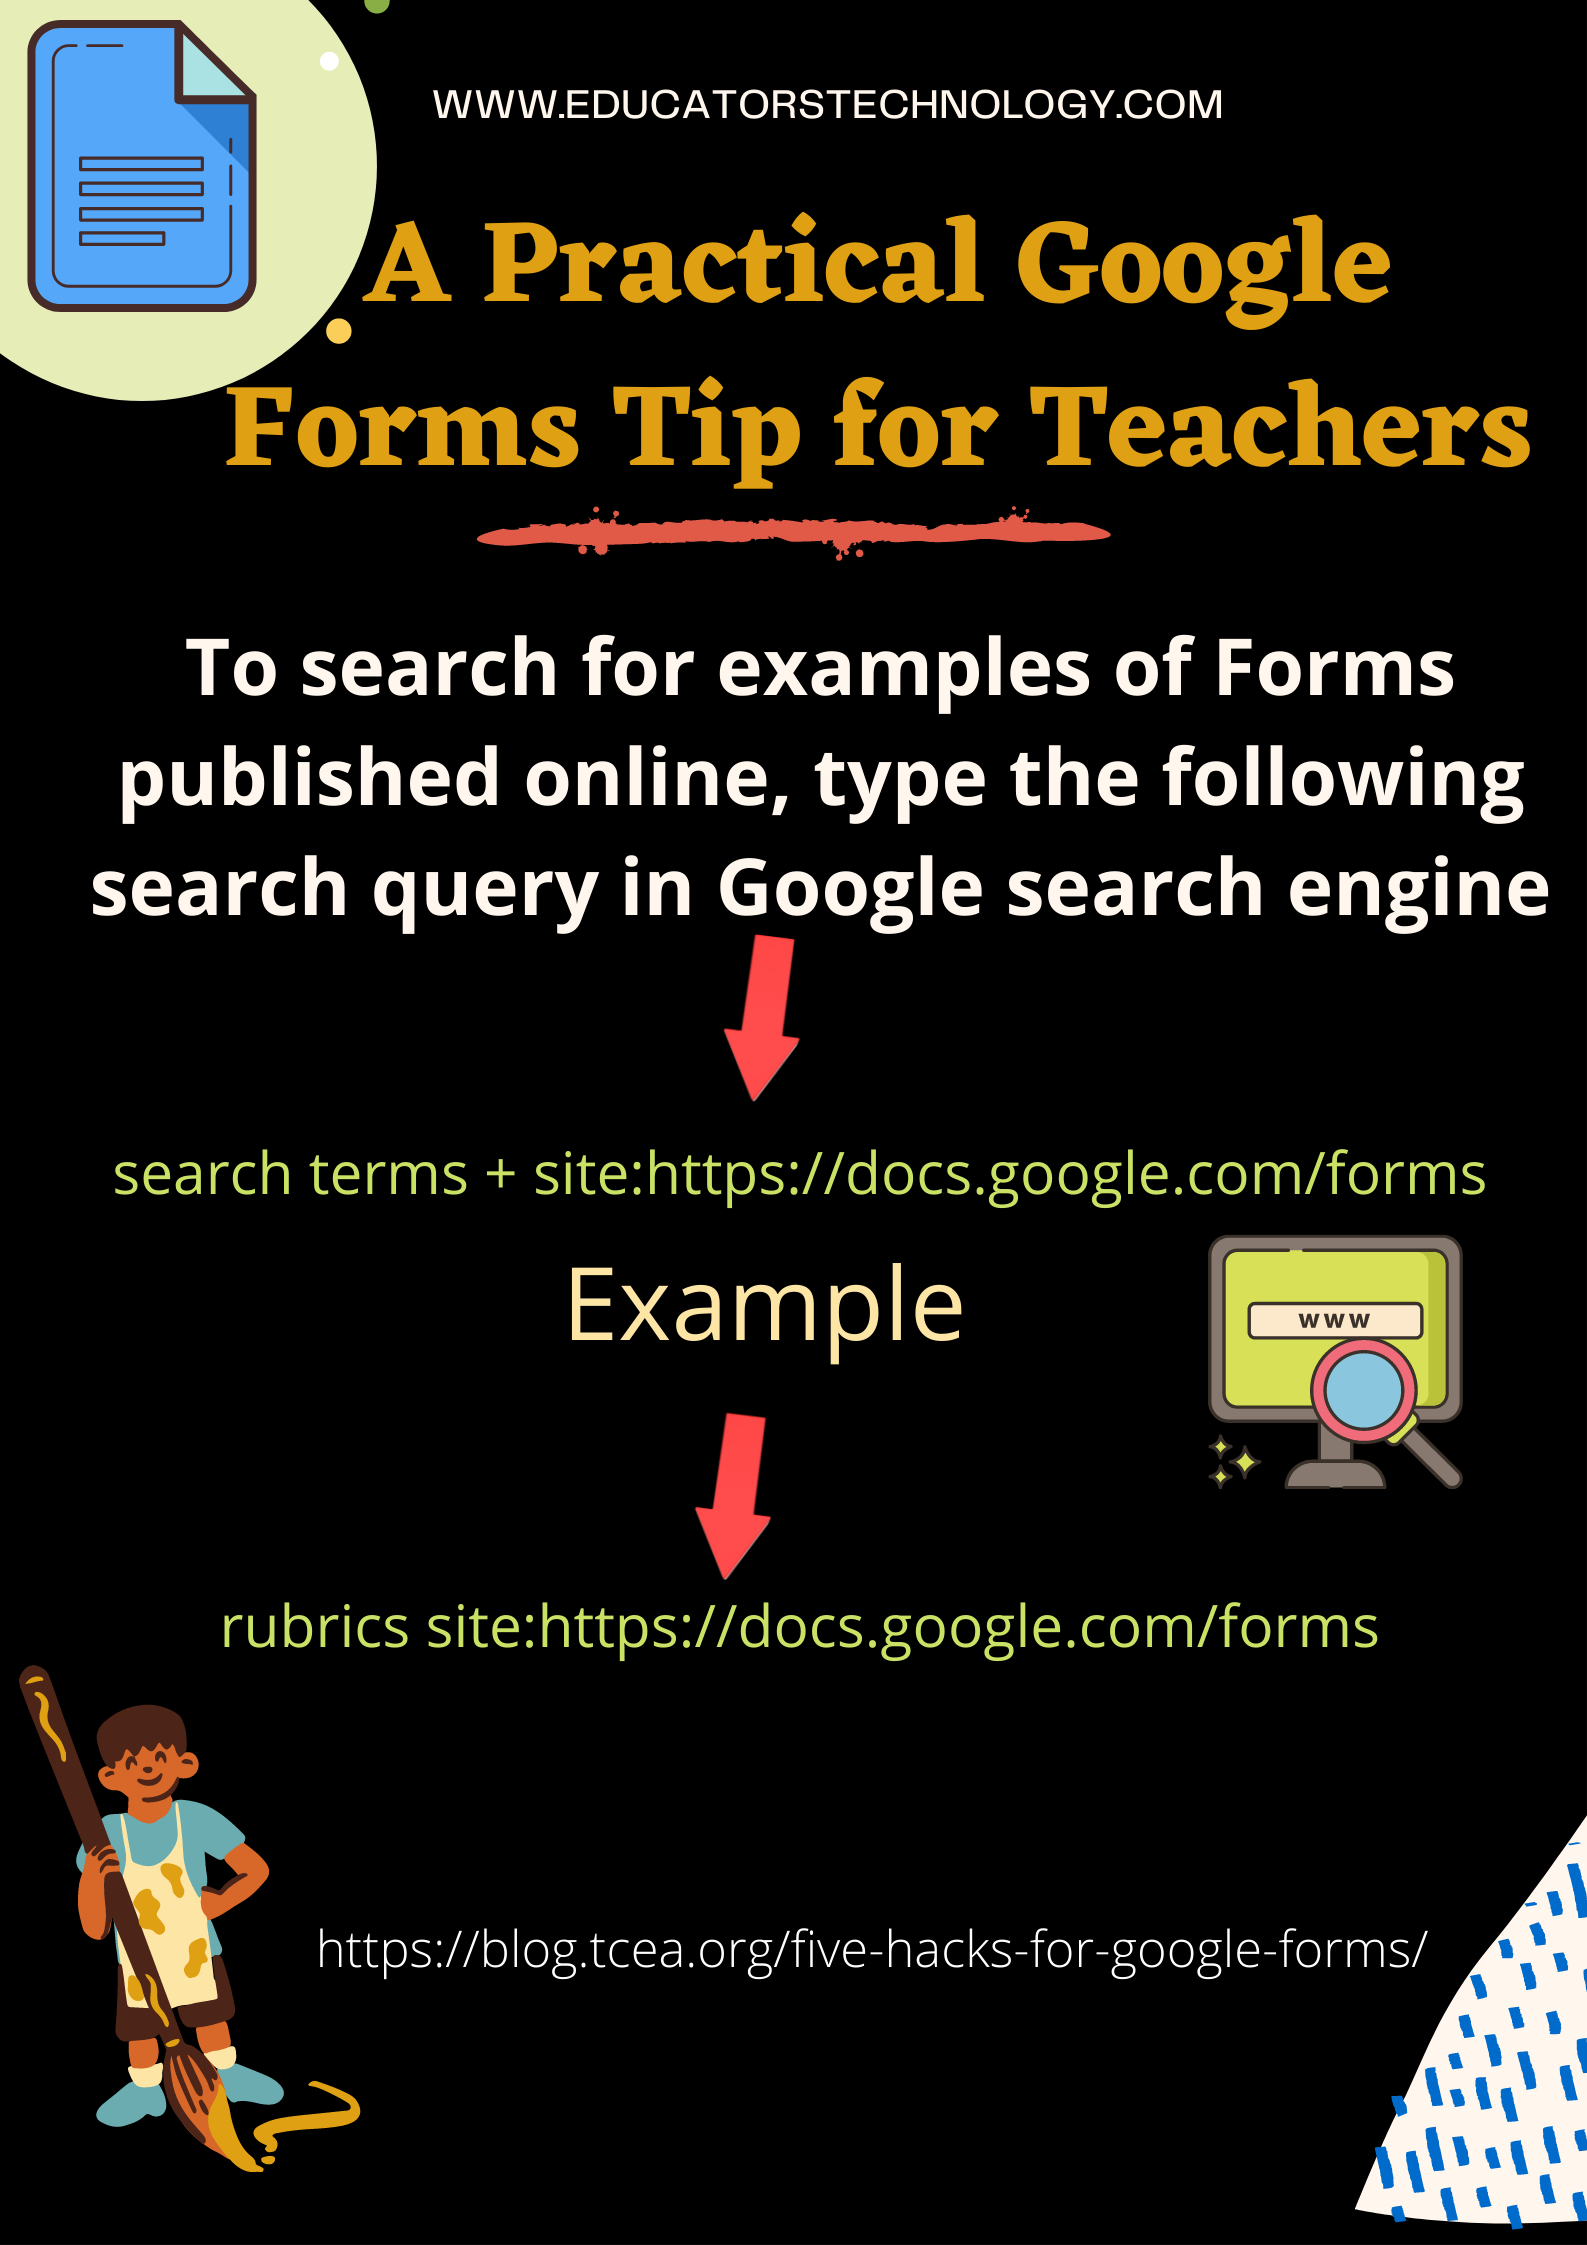 A Practical Google Forms Tip for Teachers